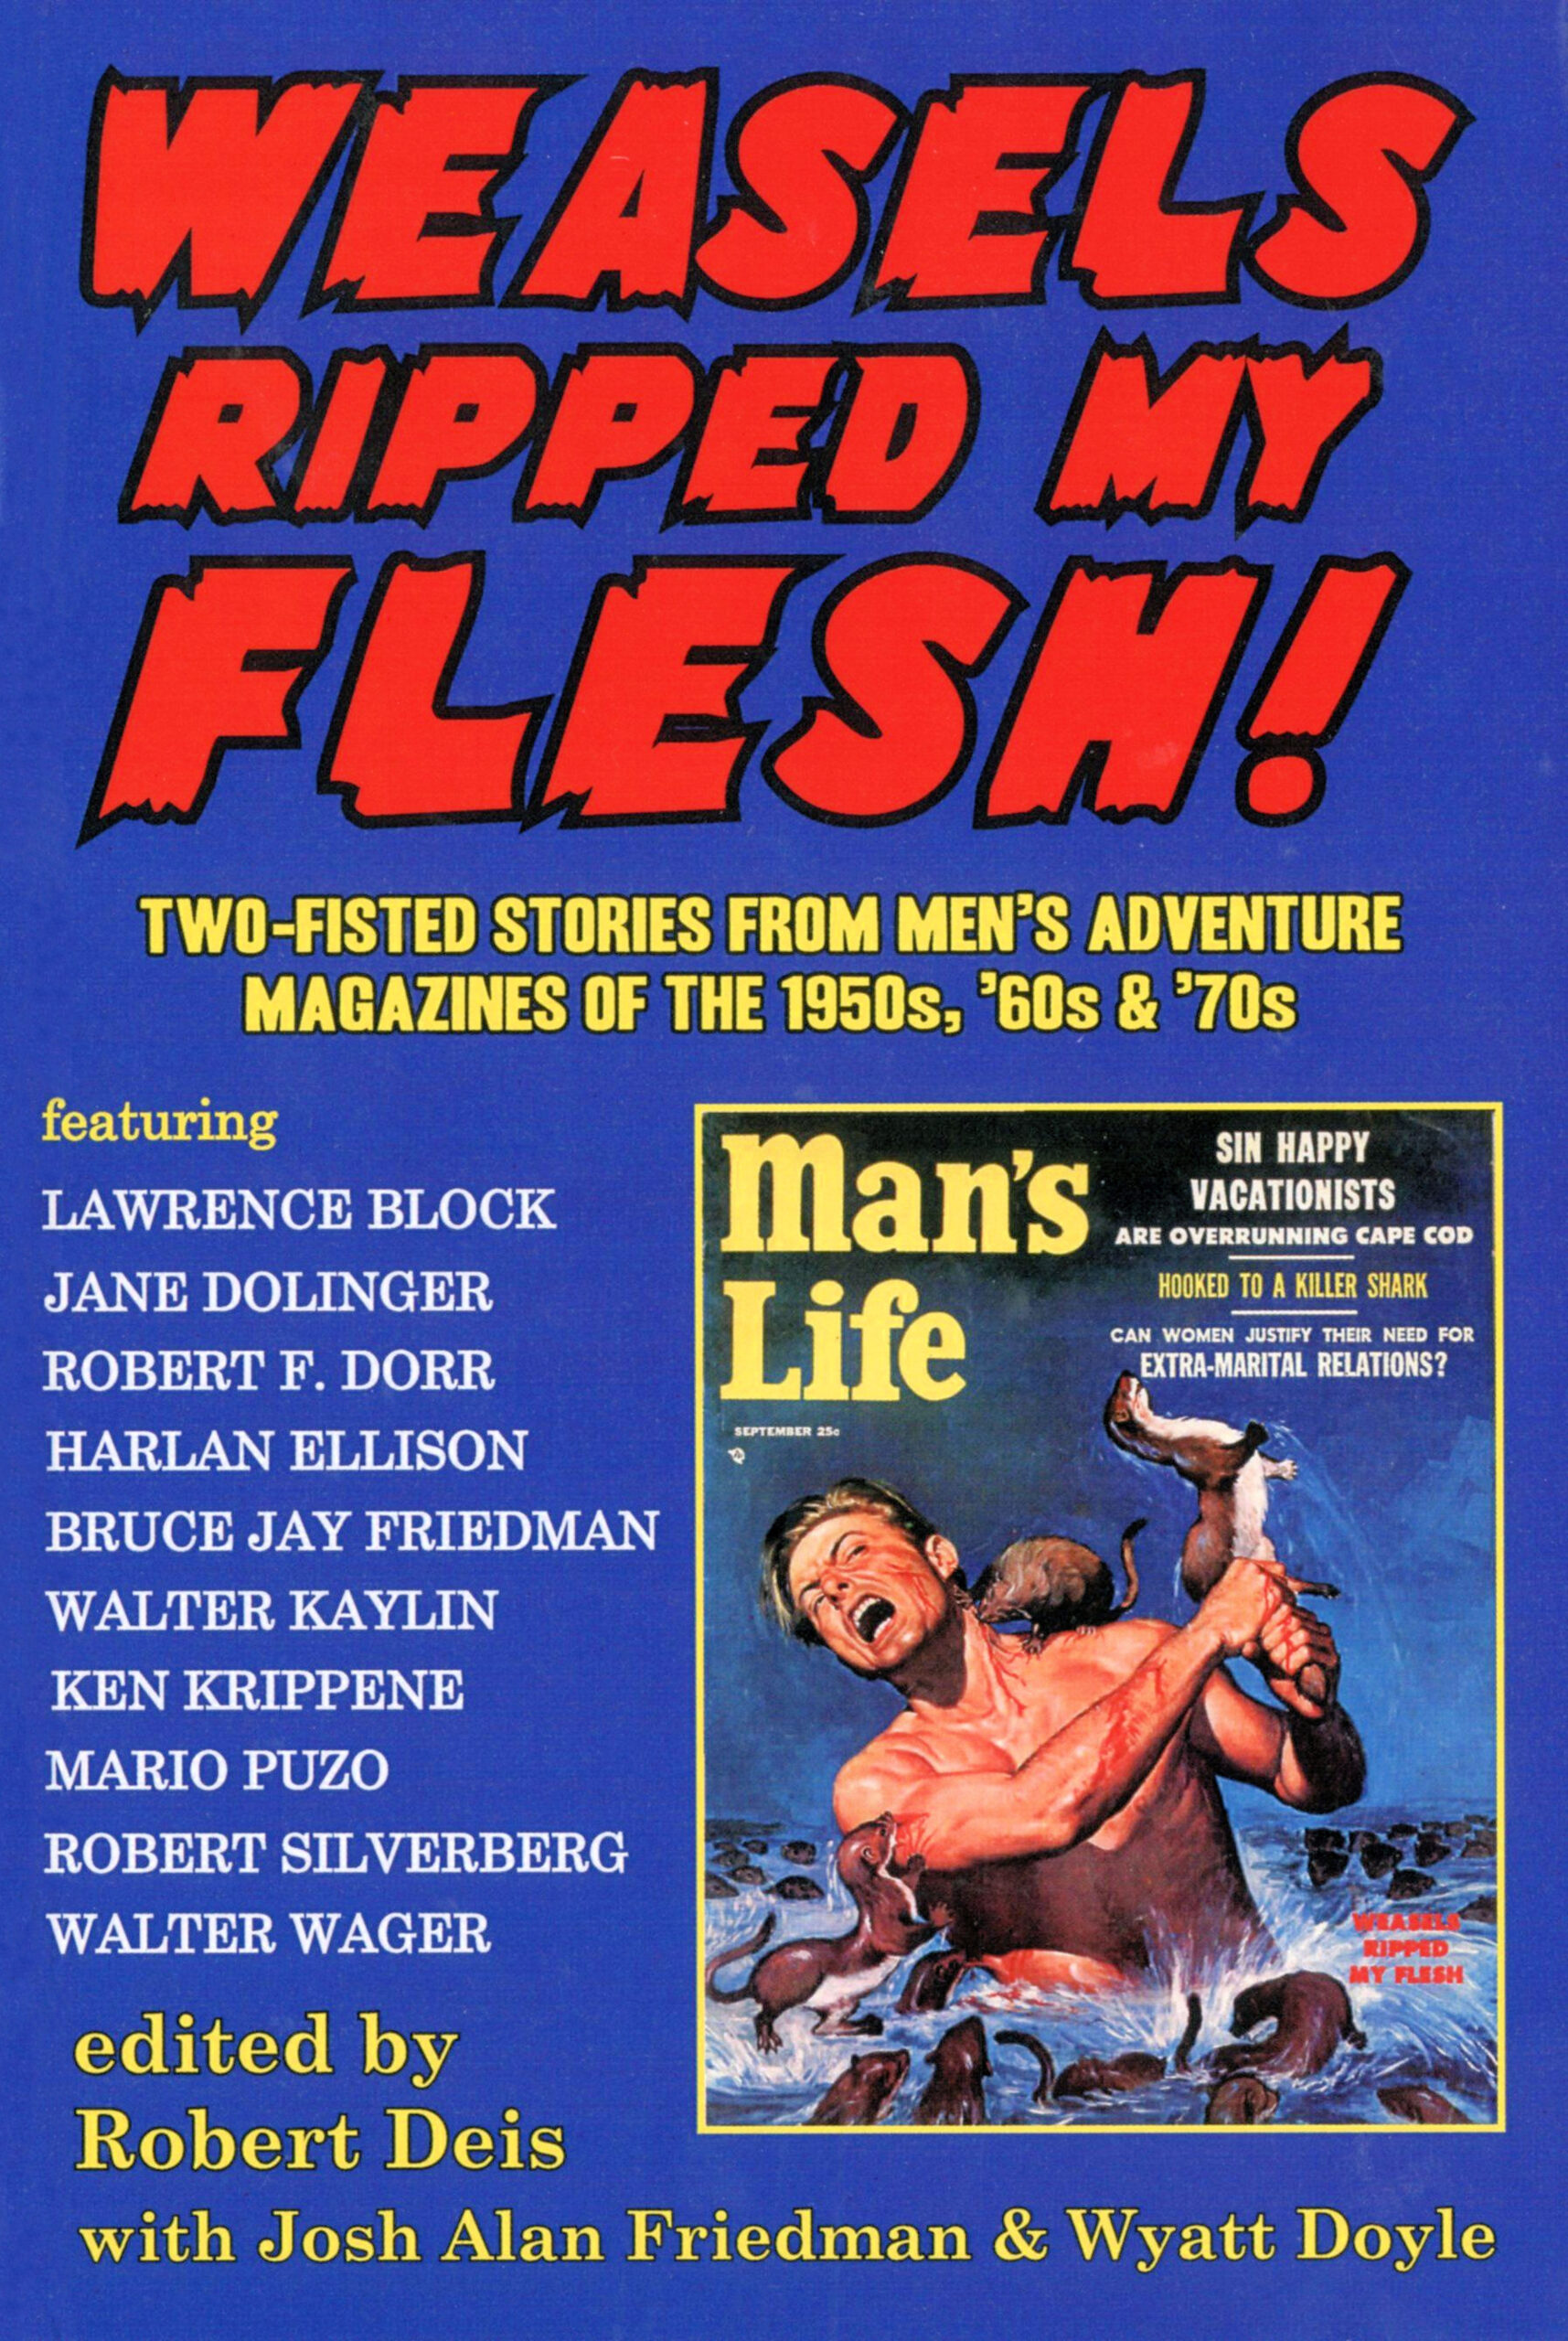 Blog　new　RIPPED　FLESH!　new　(not　of　copies　on　Adventure　WEASELS　Men's　Magazines　MY　Amazon)　available　The　EXCLUSIVE!　Brand